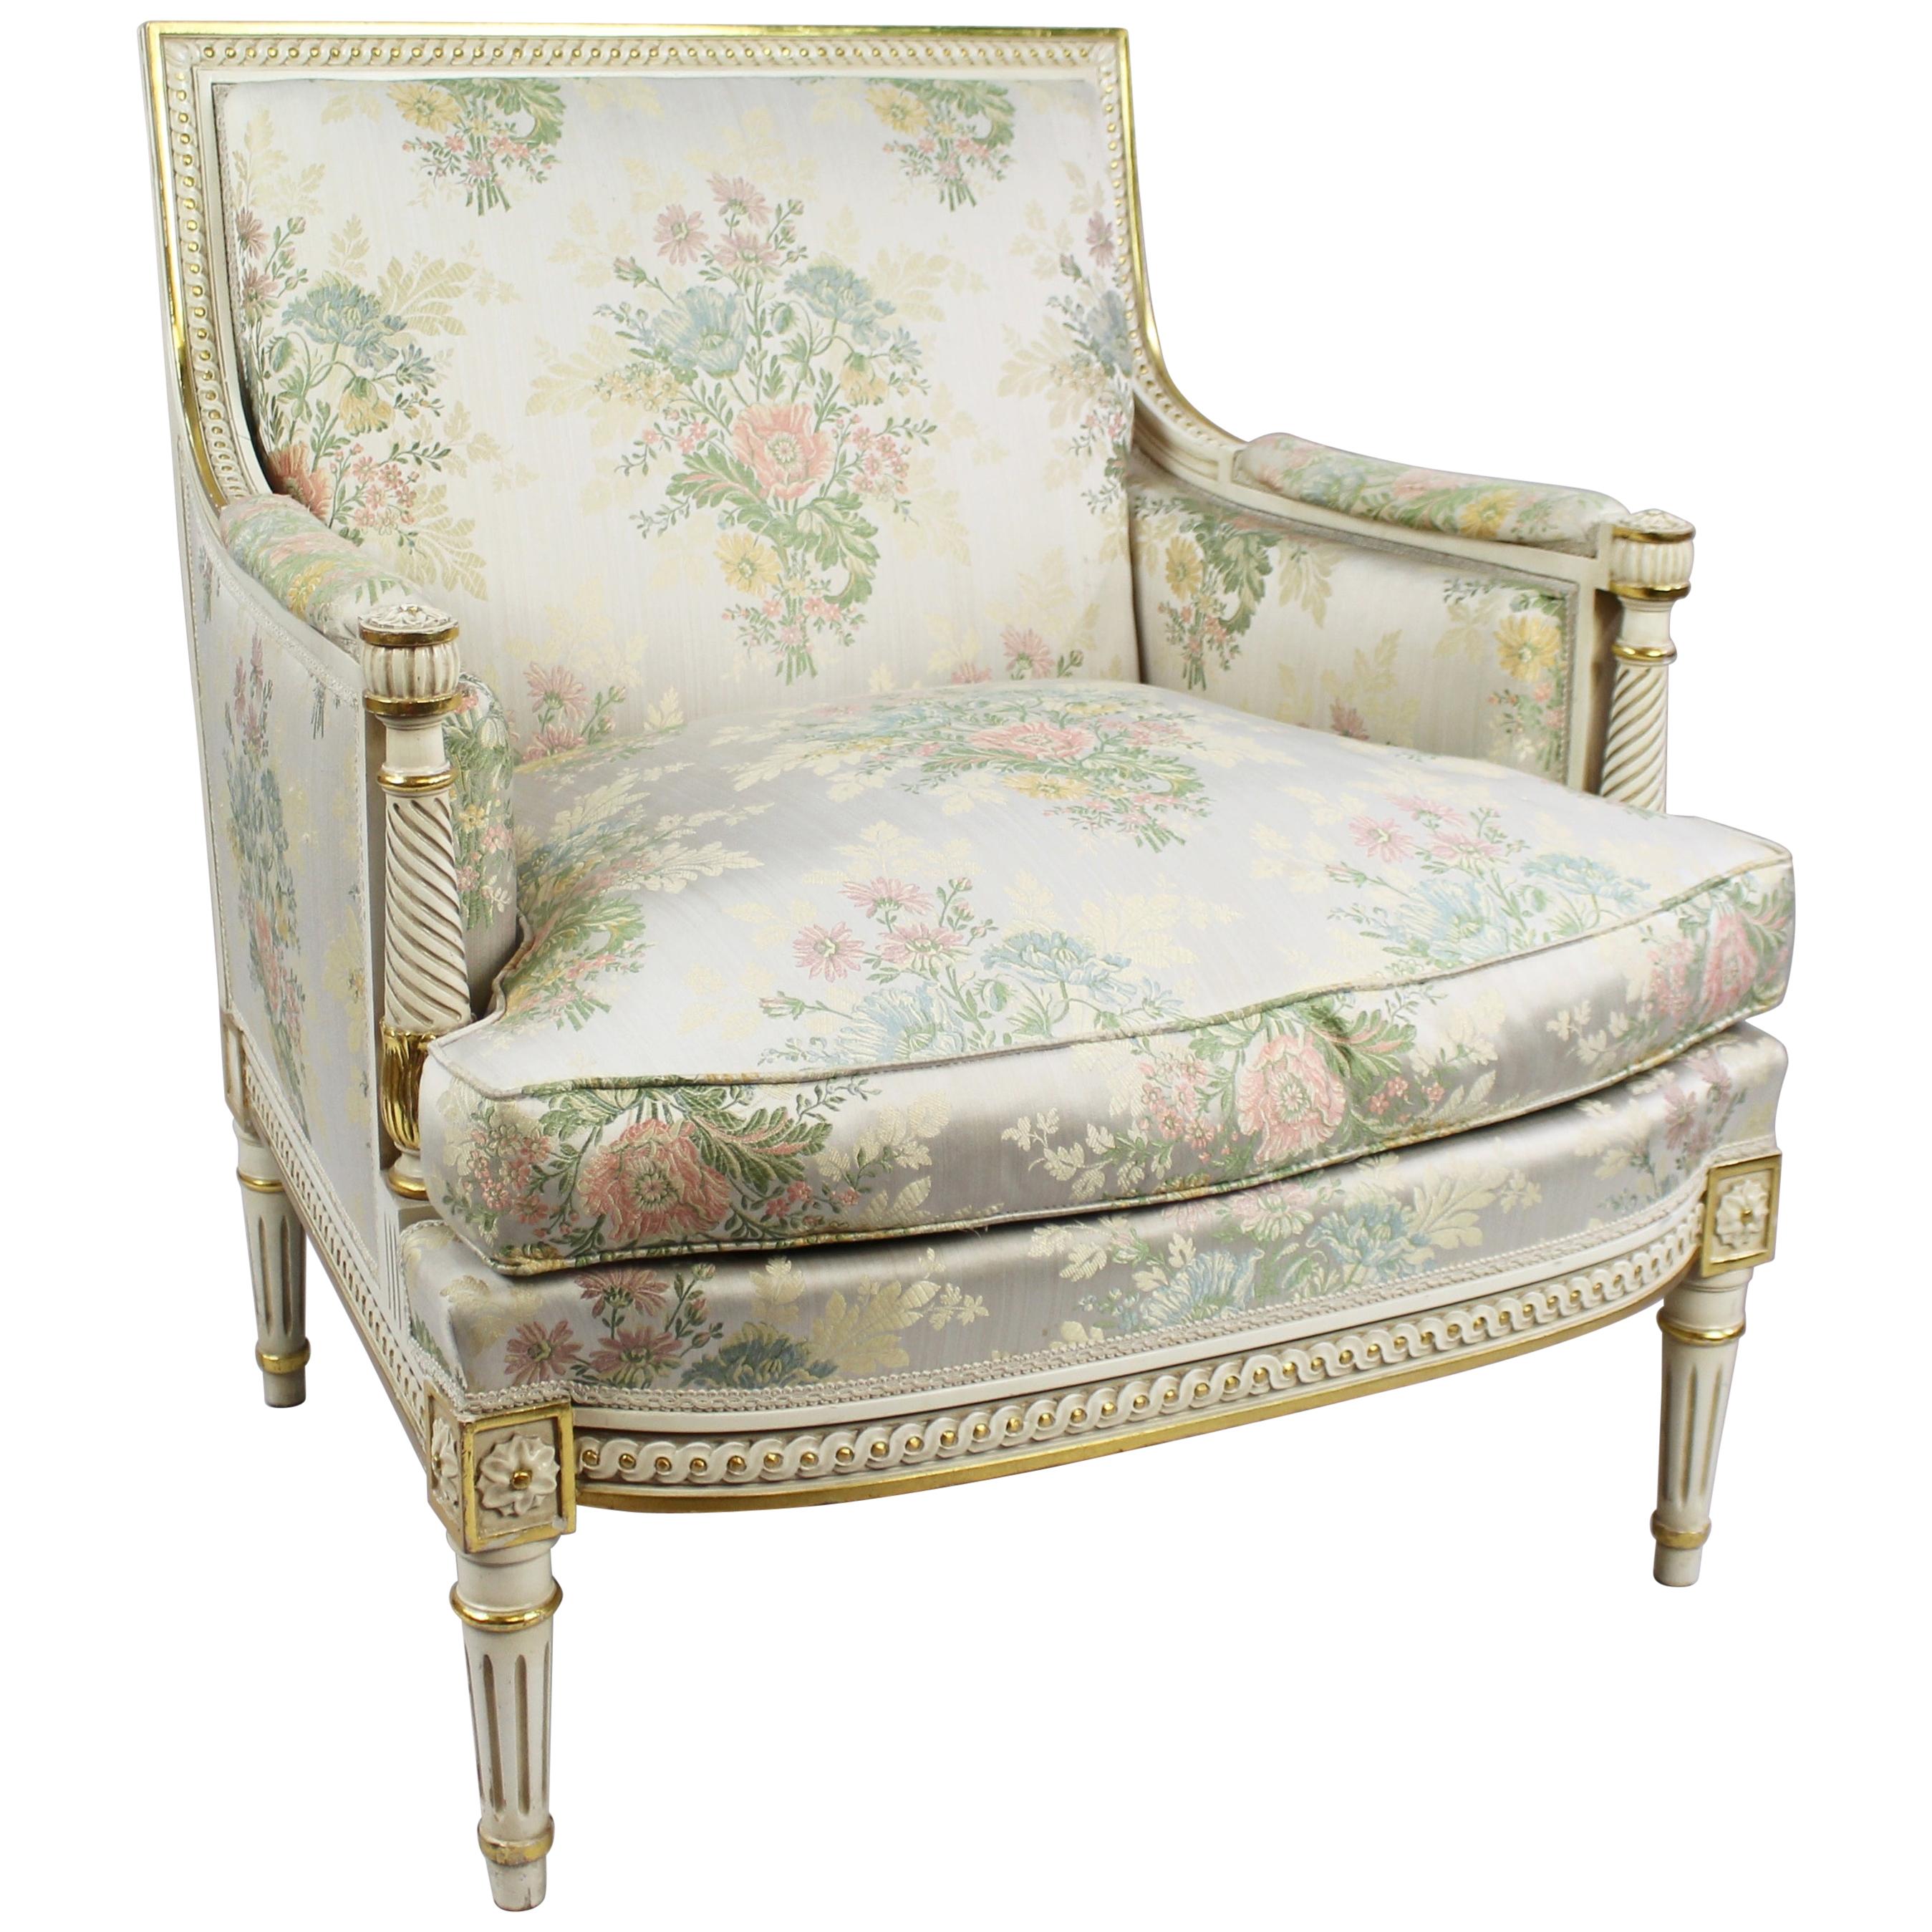 Italian Painted and Gilt Carved Wood Silik Upholstered Armchair For Sale